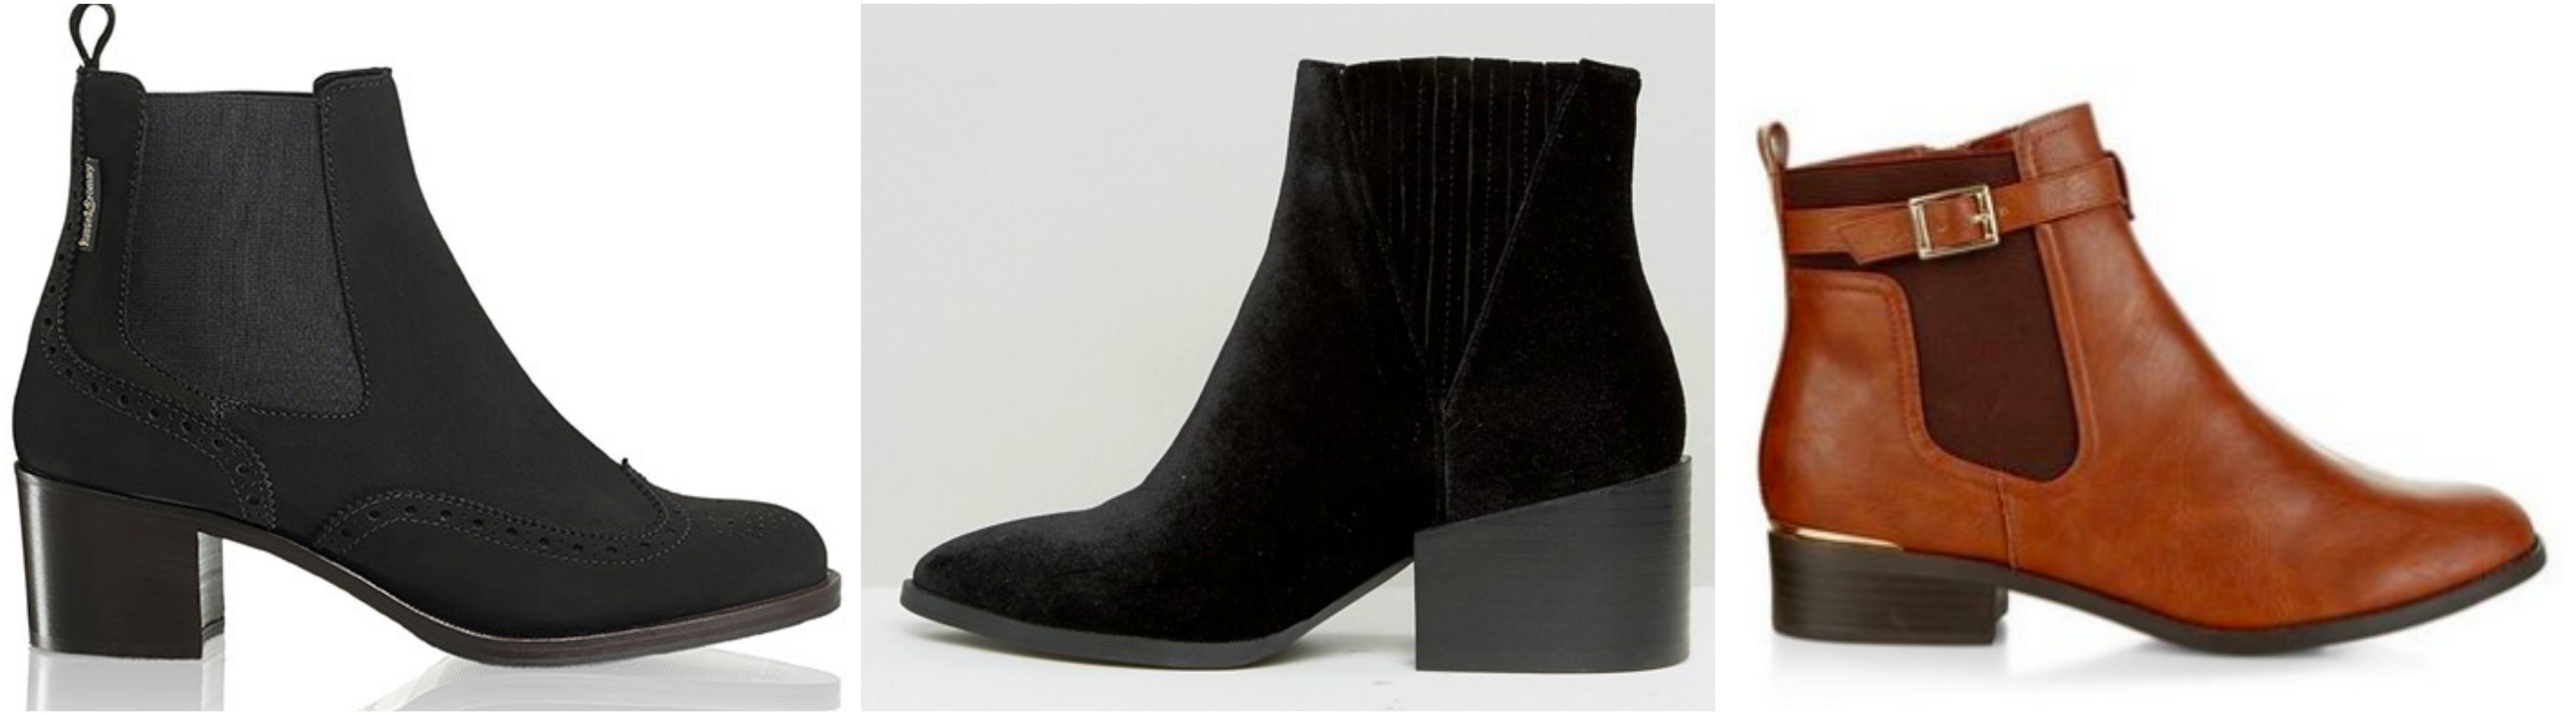 Black and Brown Chelsea Boots